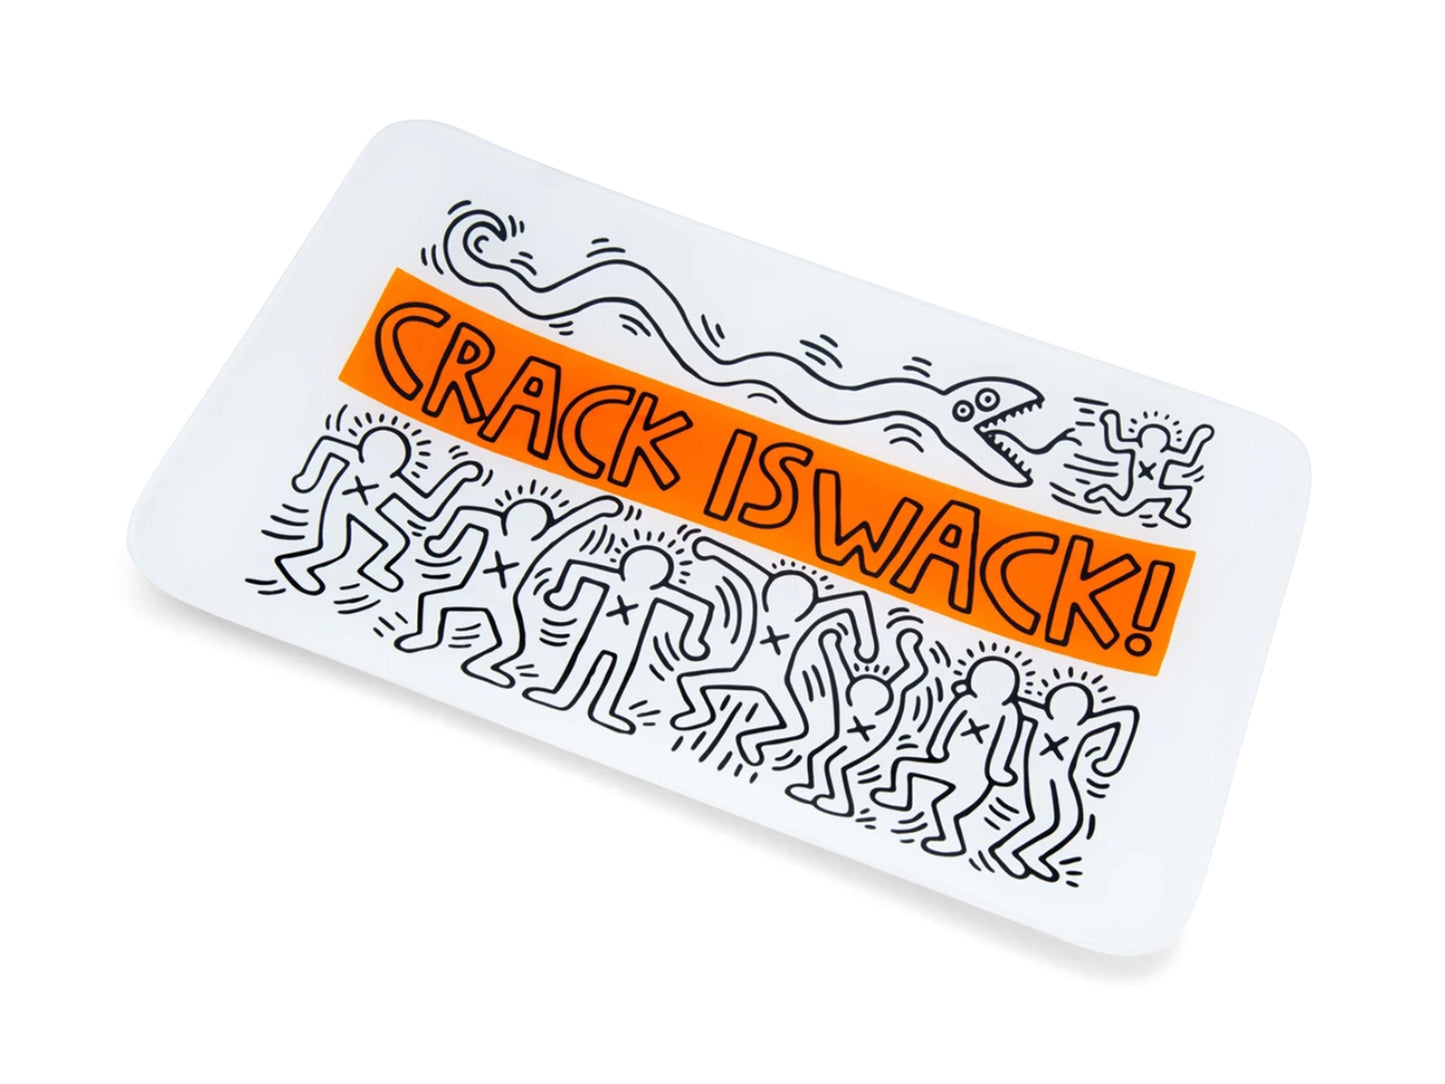 K. Haring Glass Tray - Crack Is Wack